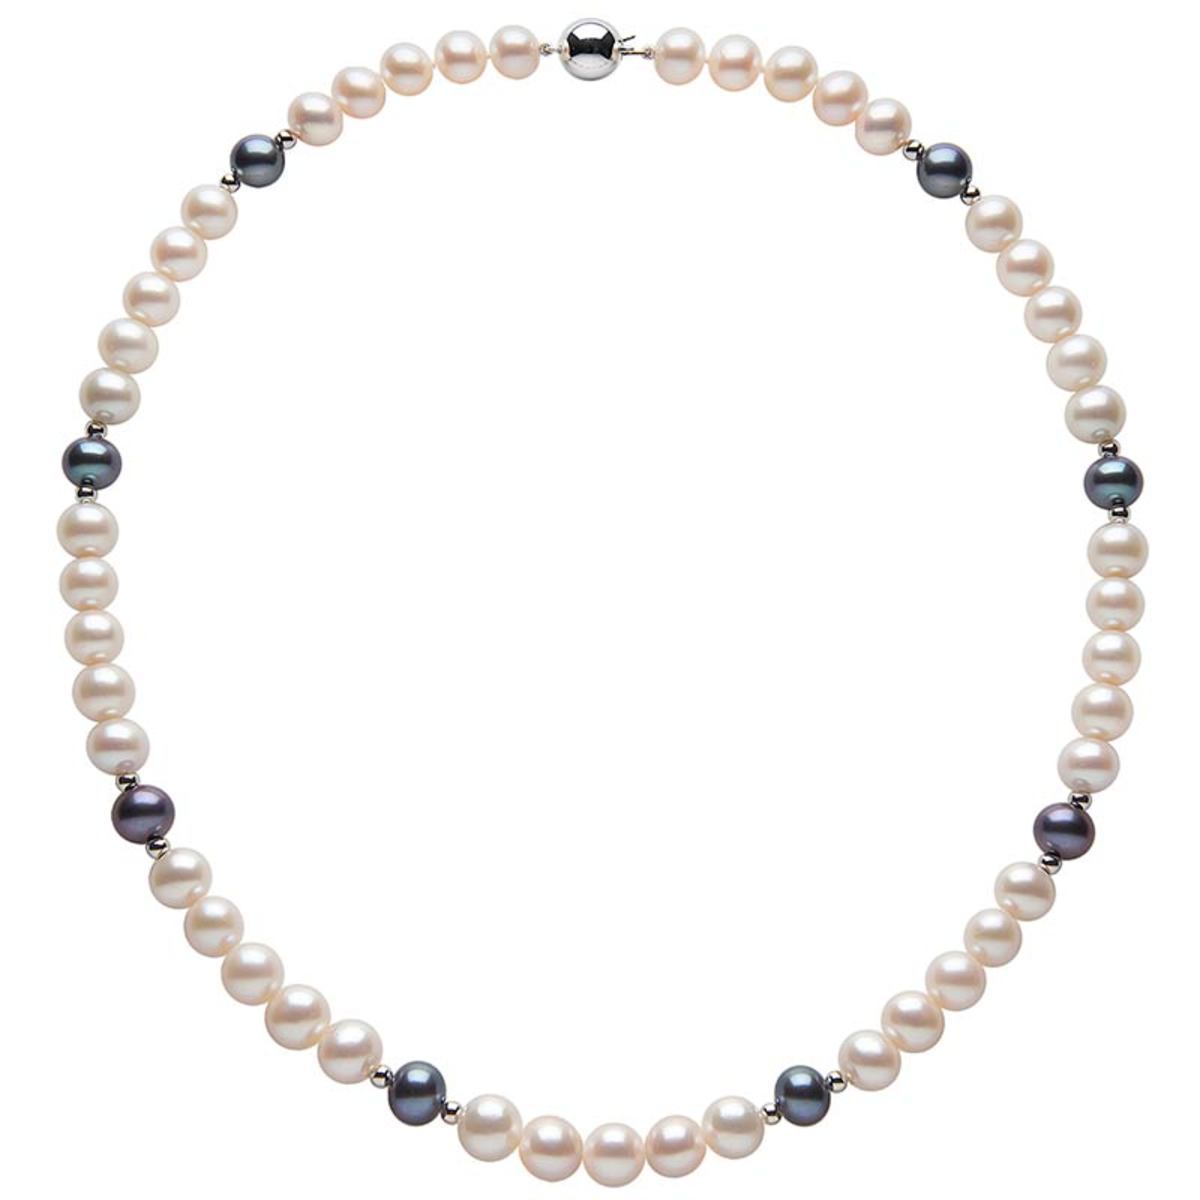 8-8.5mm Cultured Freshwater Black and White Pearl Necklace, 18ct White ...